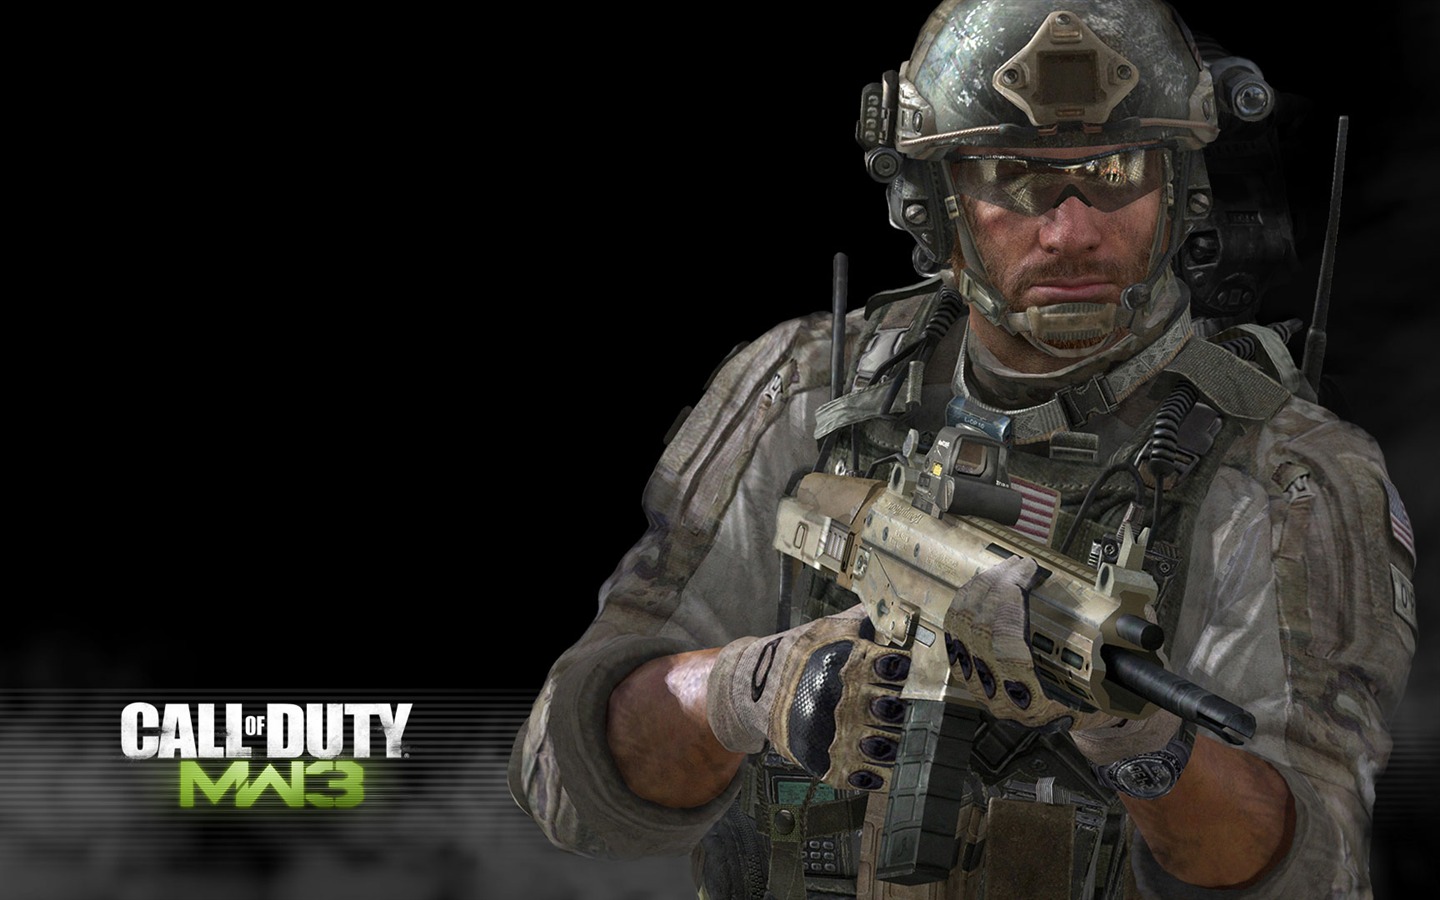 Call of Duty: MW3 HD Wallpapers #11 - 1440x900